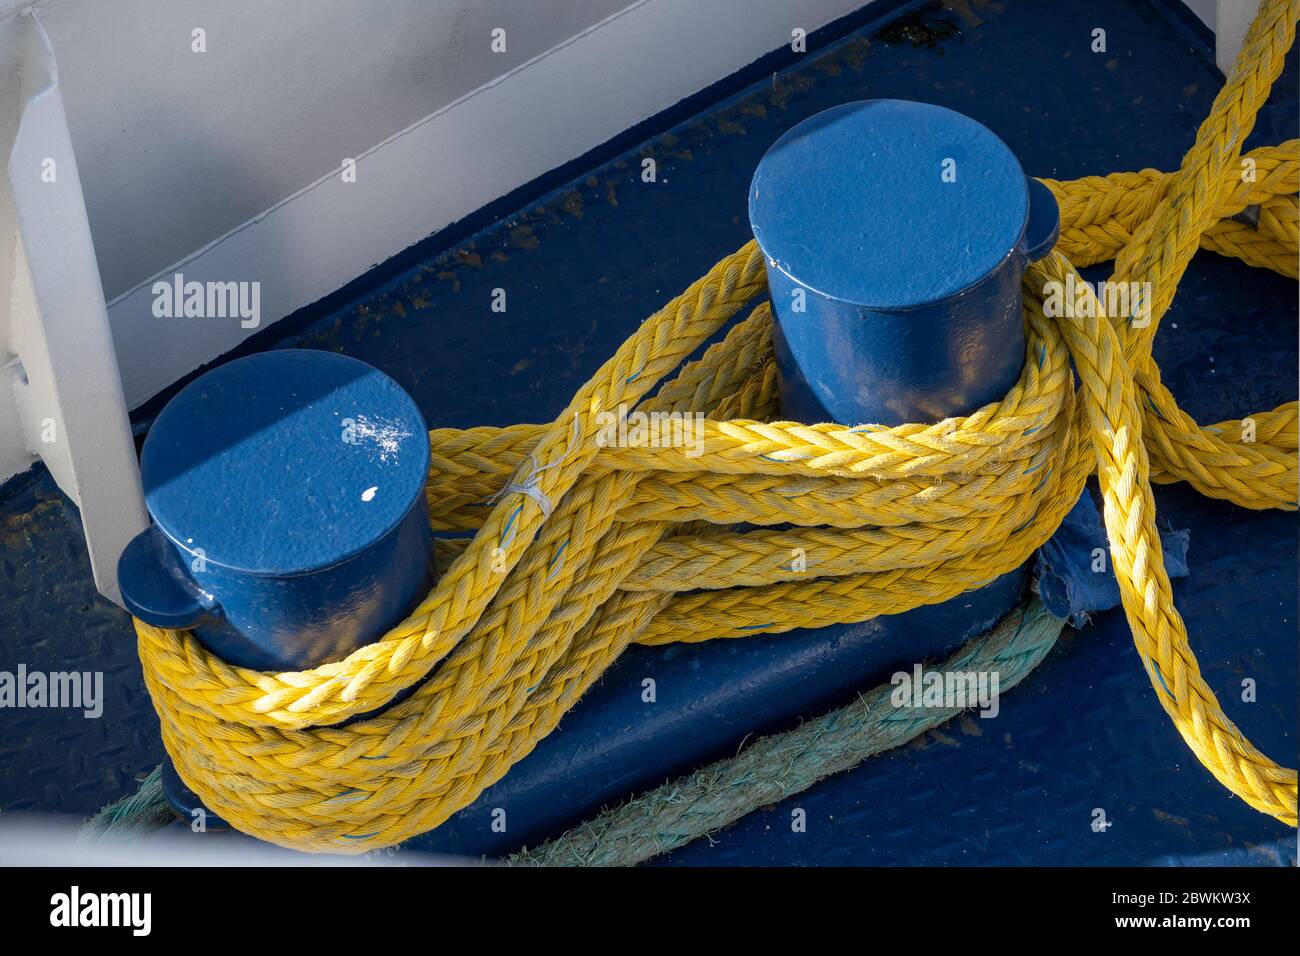 yellow ship rope tied around blue mooring bollards on a metal boat